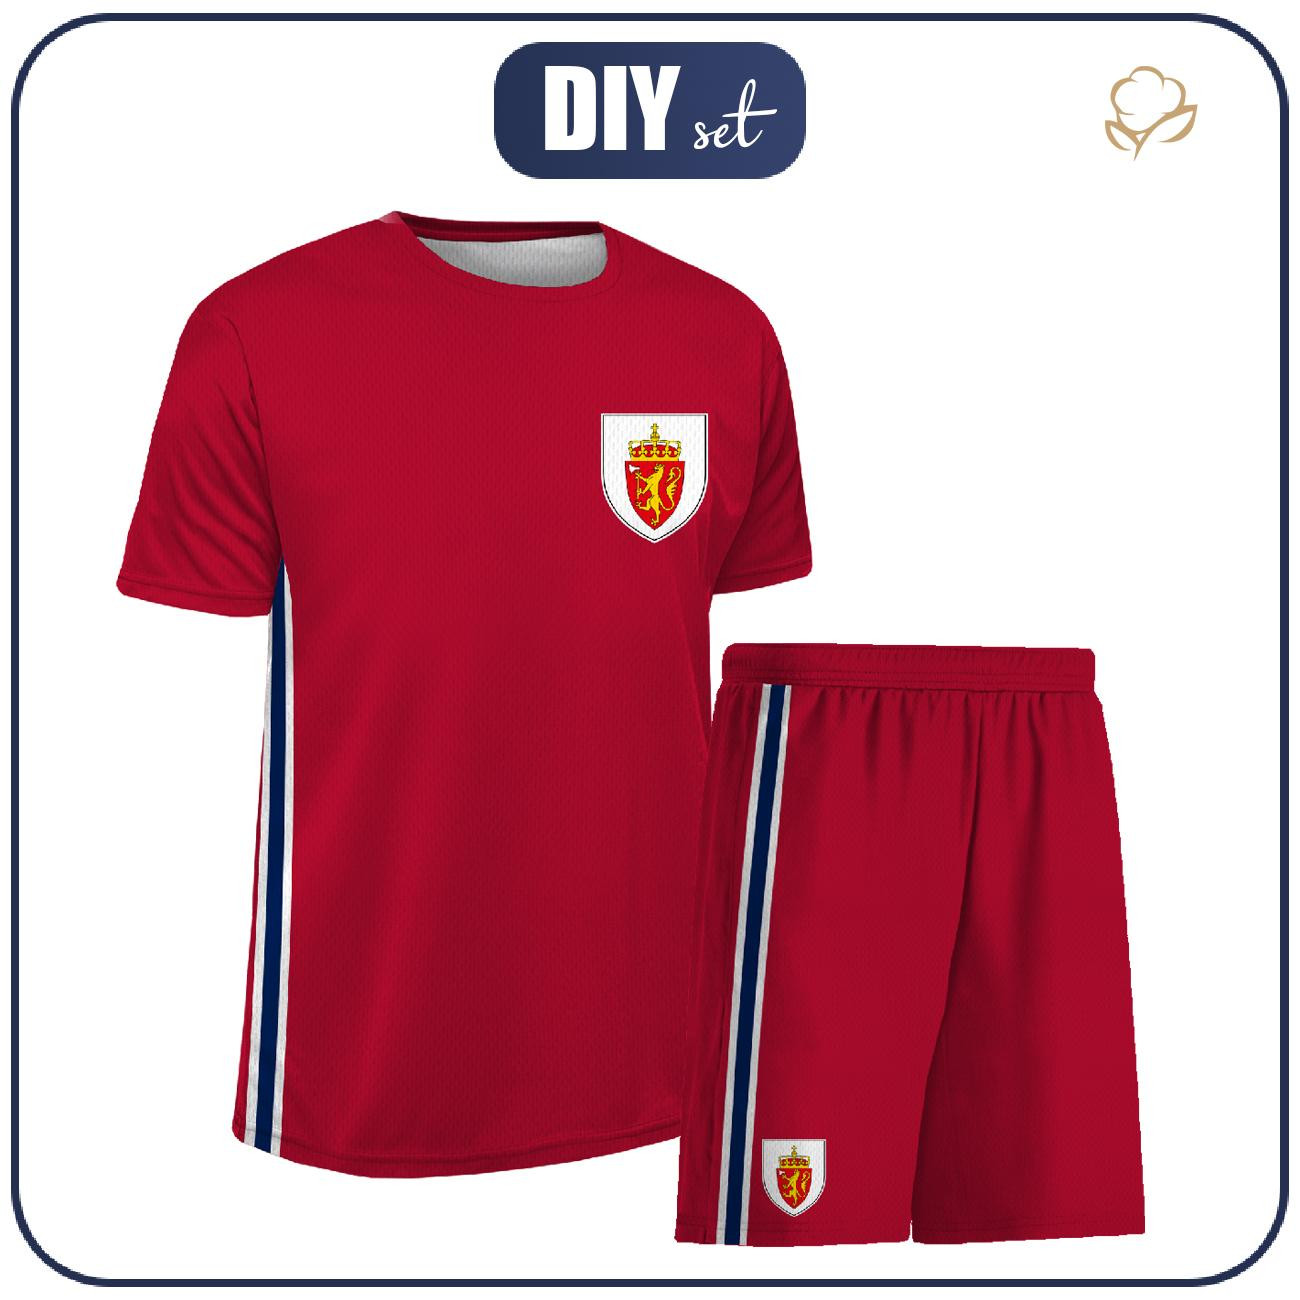 Children's sport outfit "PELE" - NORWAY - sewing set 86